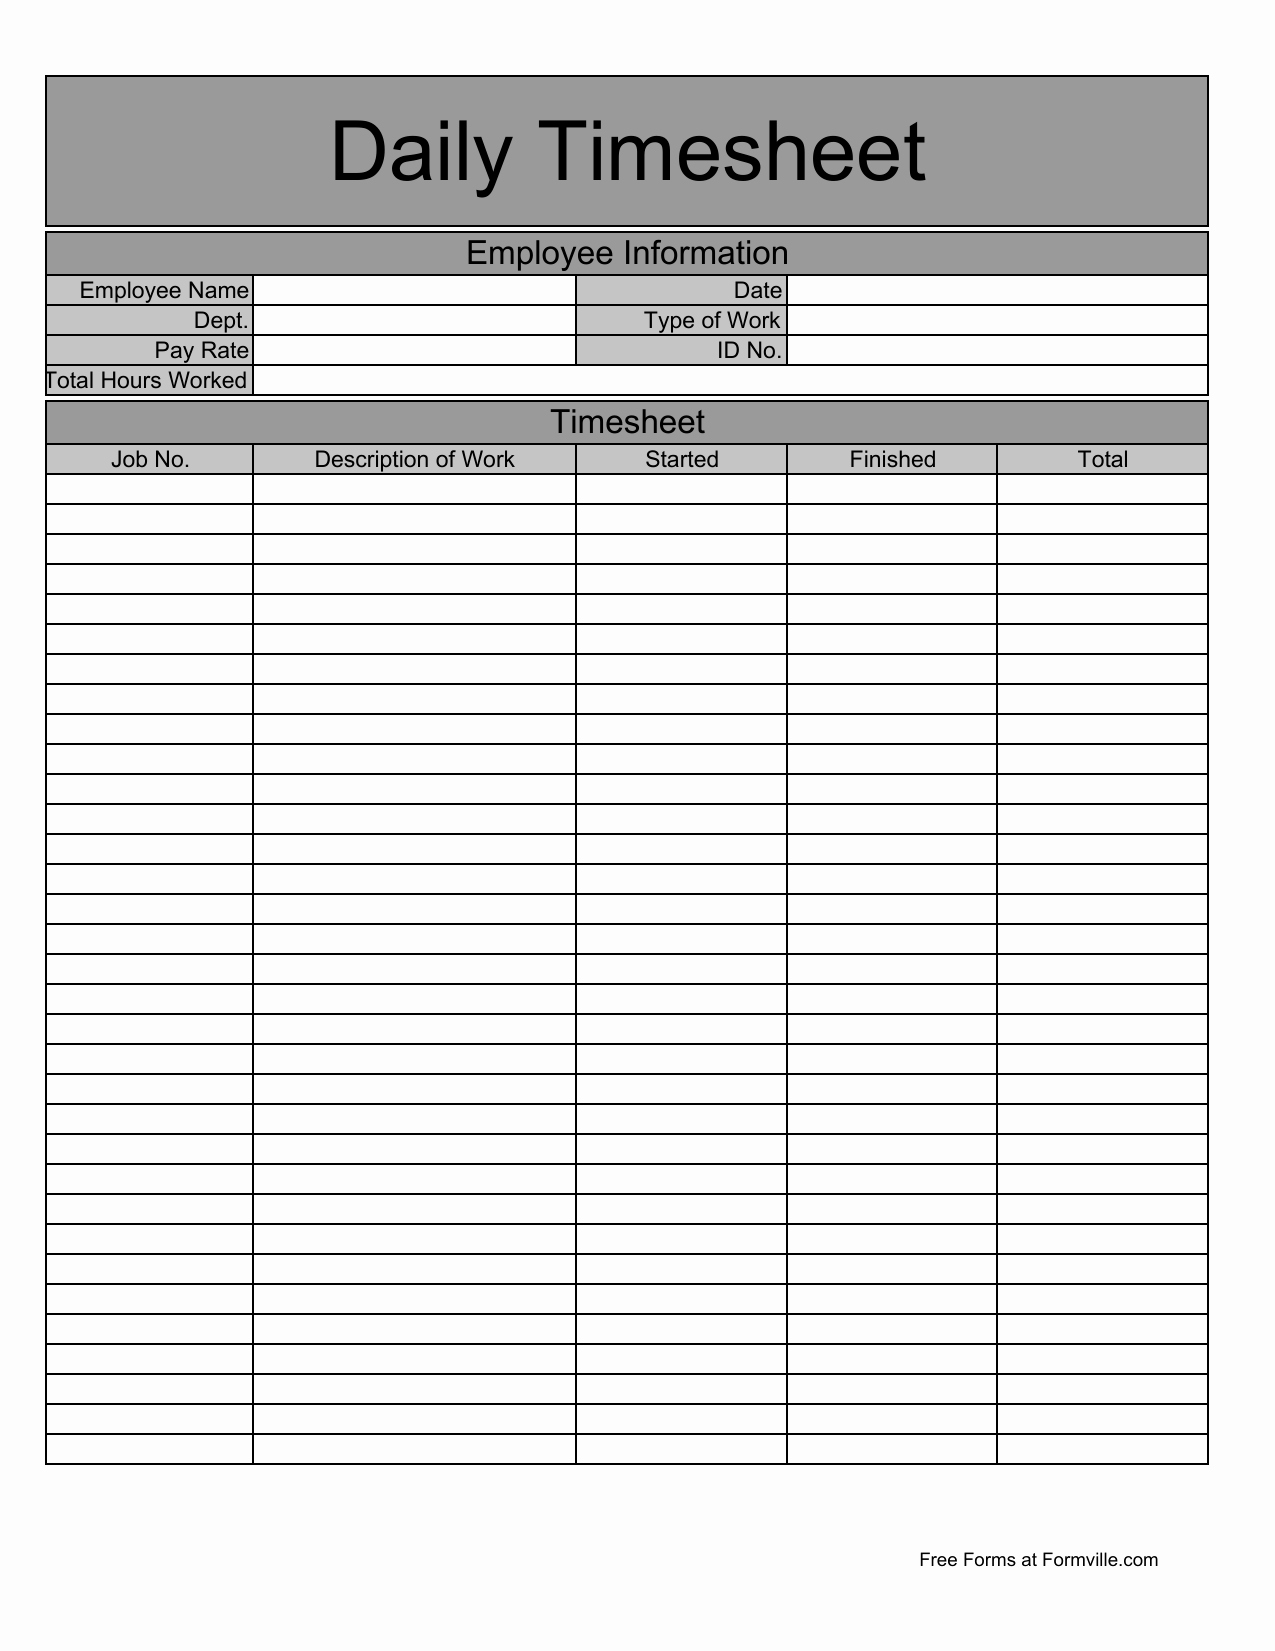 Daily Timesheet Excel Template New Download Daily Timesheet Template Excel Pdf